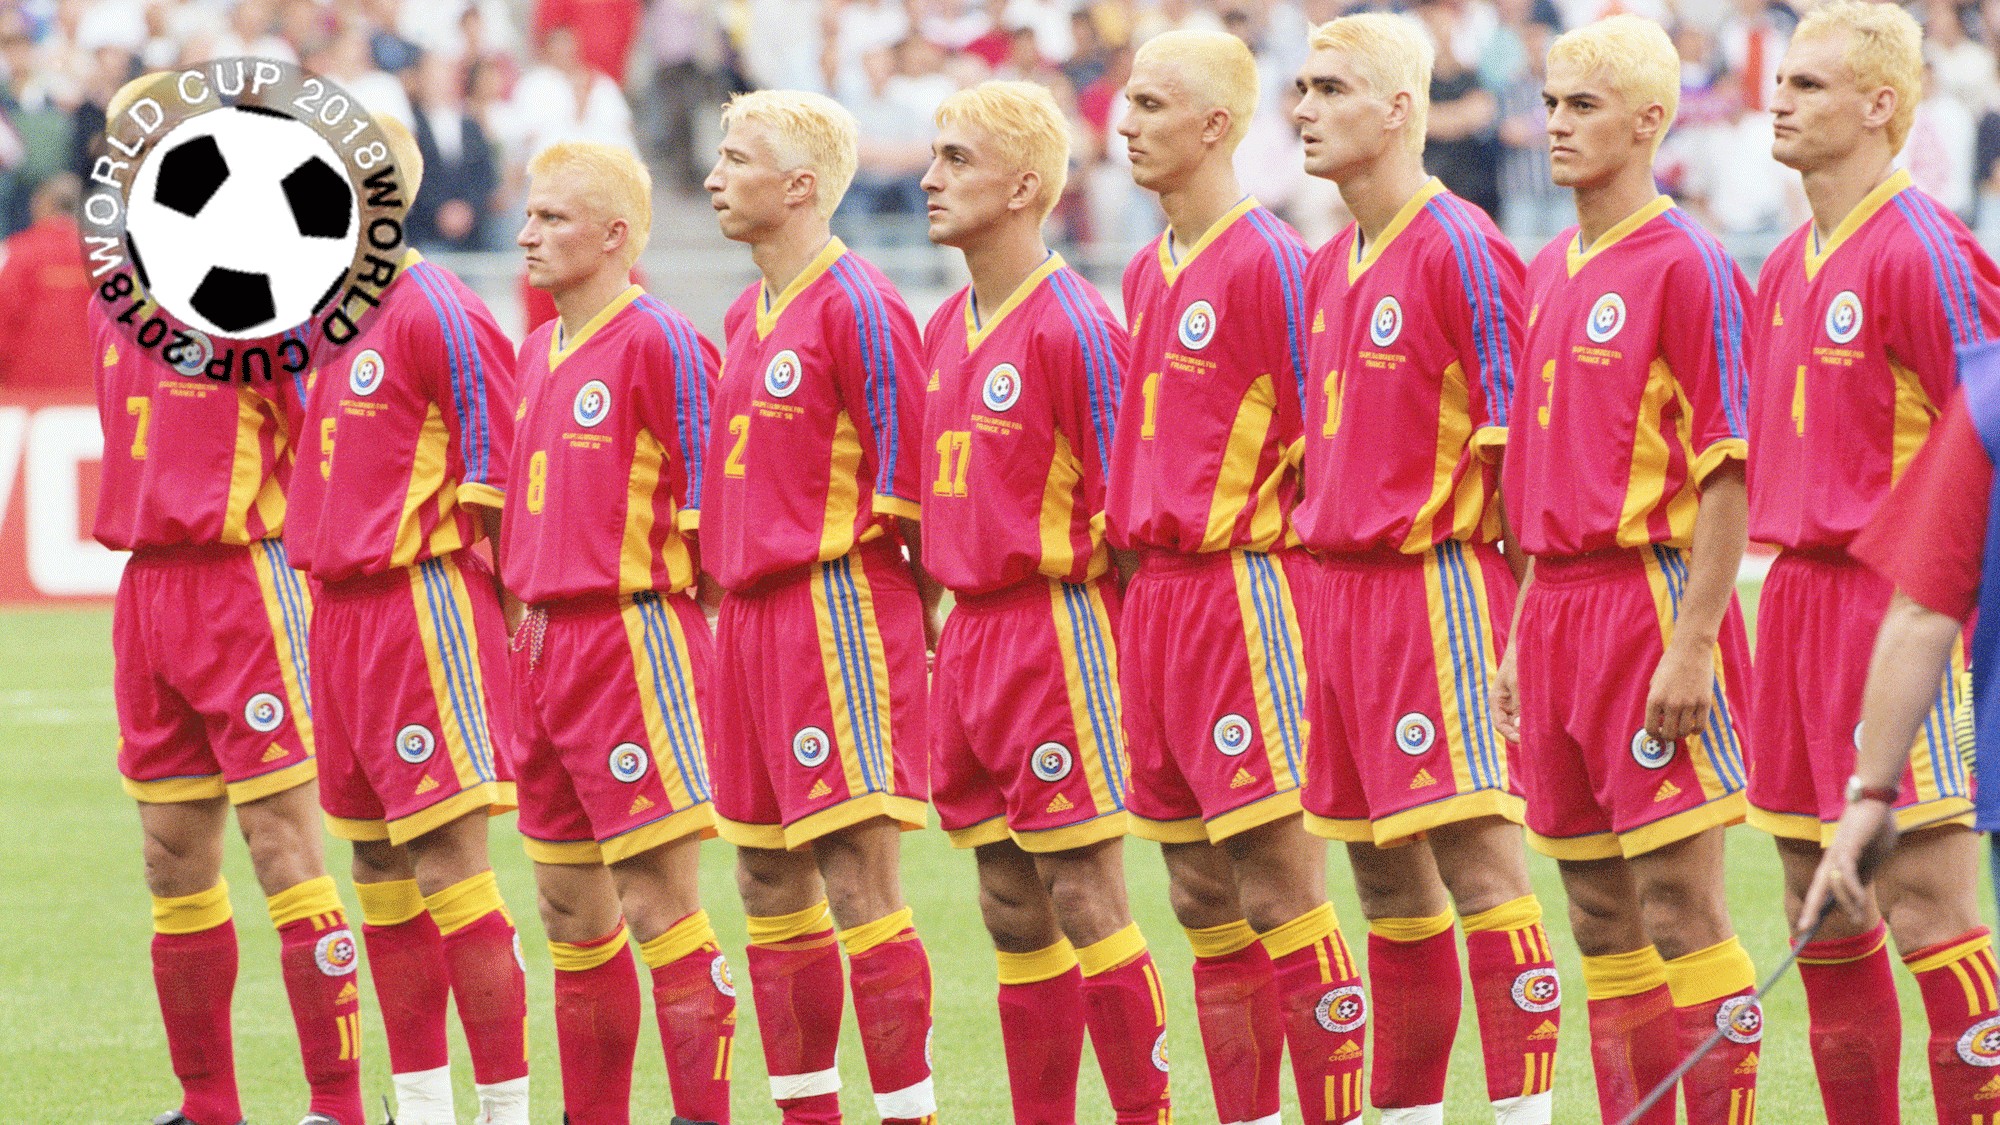 The Inside Story of Why the Entire Romania '98 Team Bleached Their